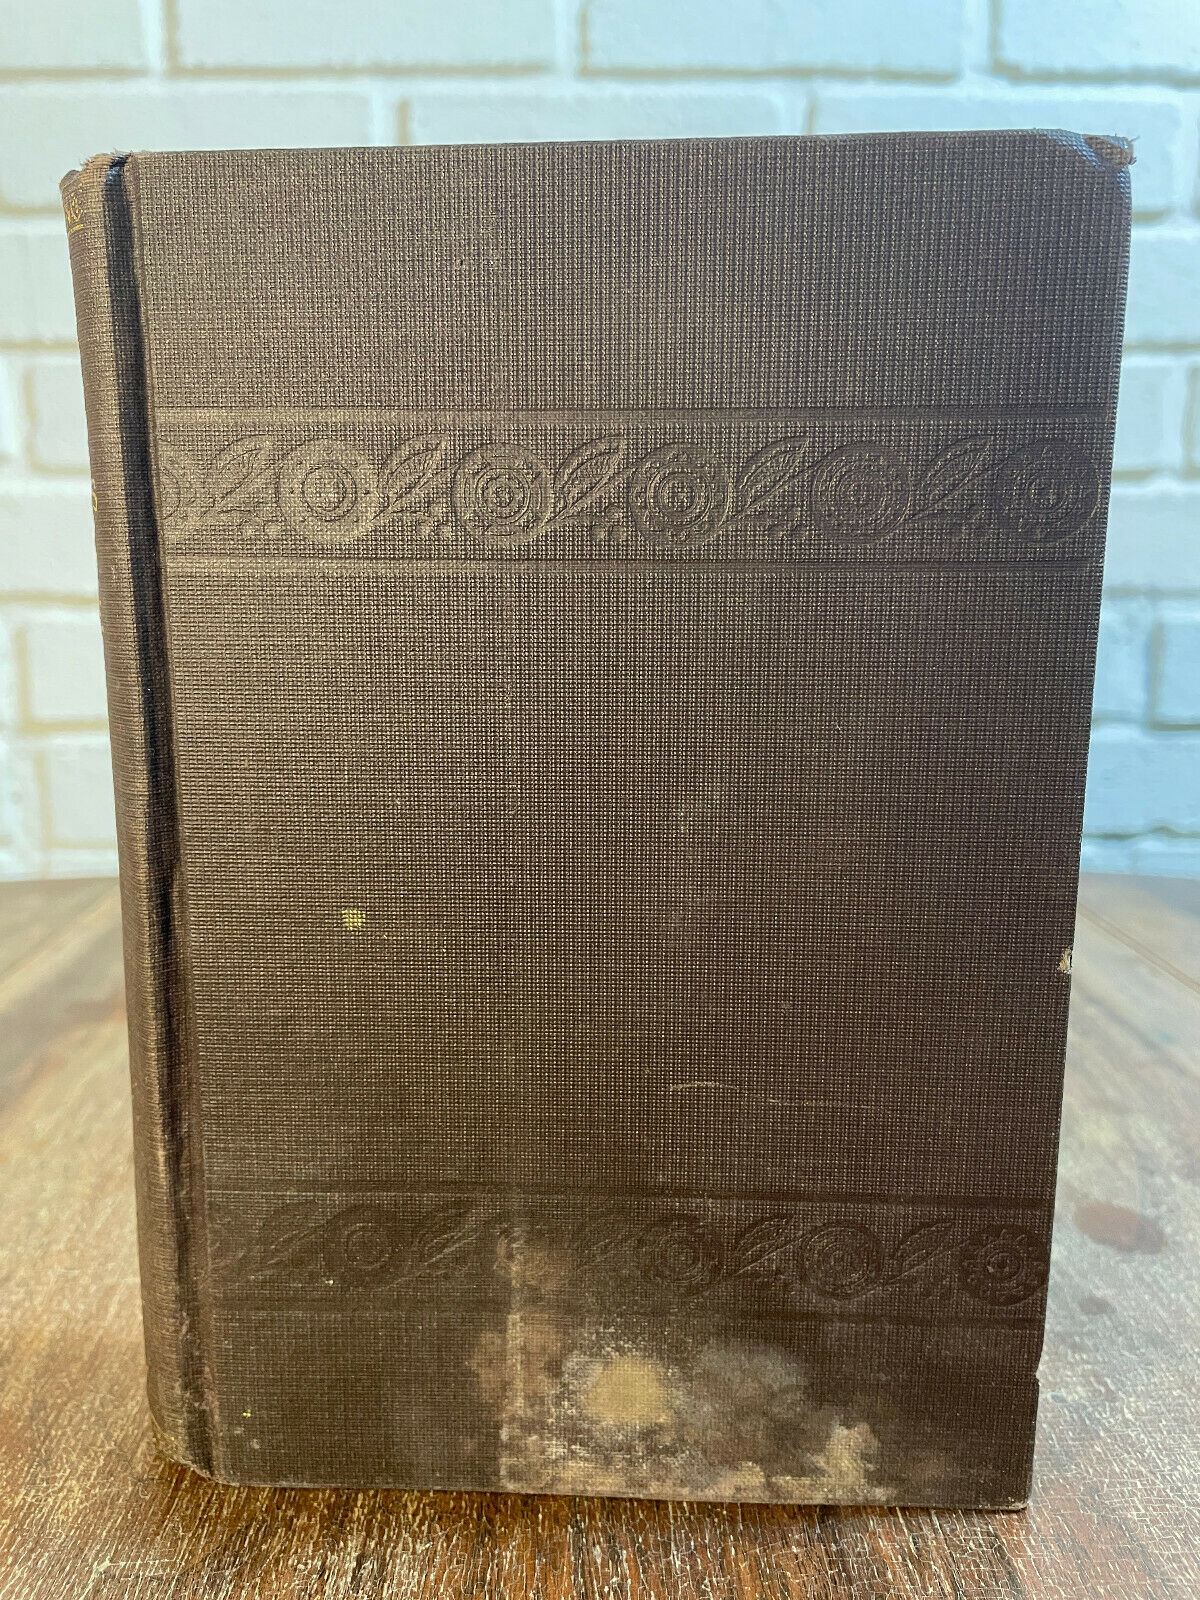 The Wonders of Grace by John Lemley (1904, Hardcover) Second Edition (4A)